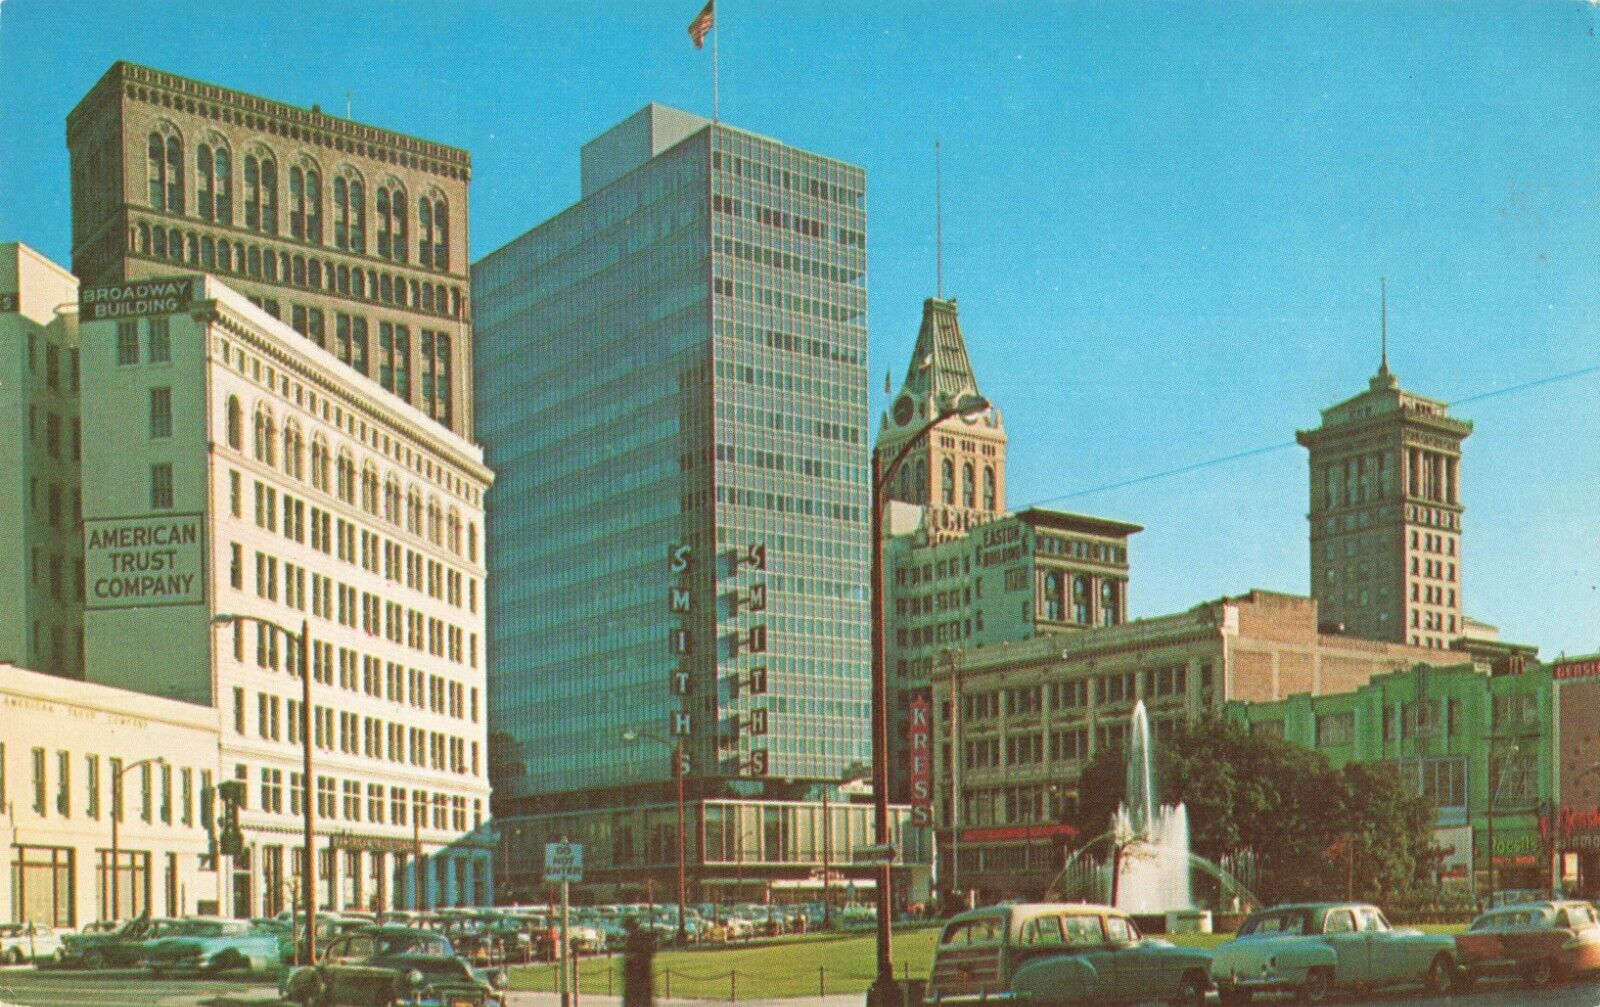 Oakland CA California, Smiths, Fountain, Downtown, Old Cars, Vintage Postcard